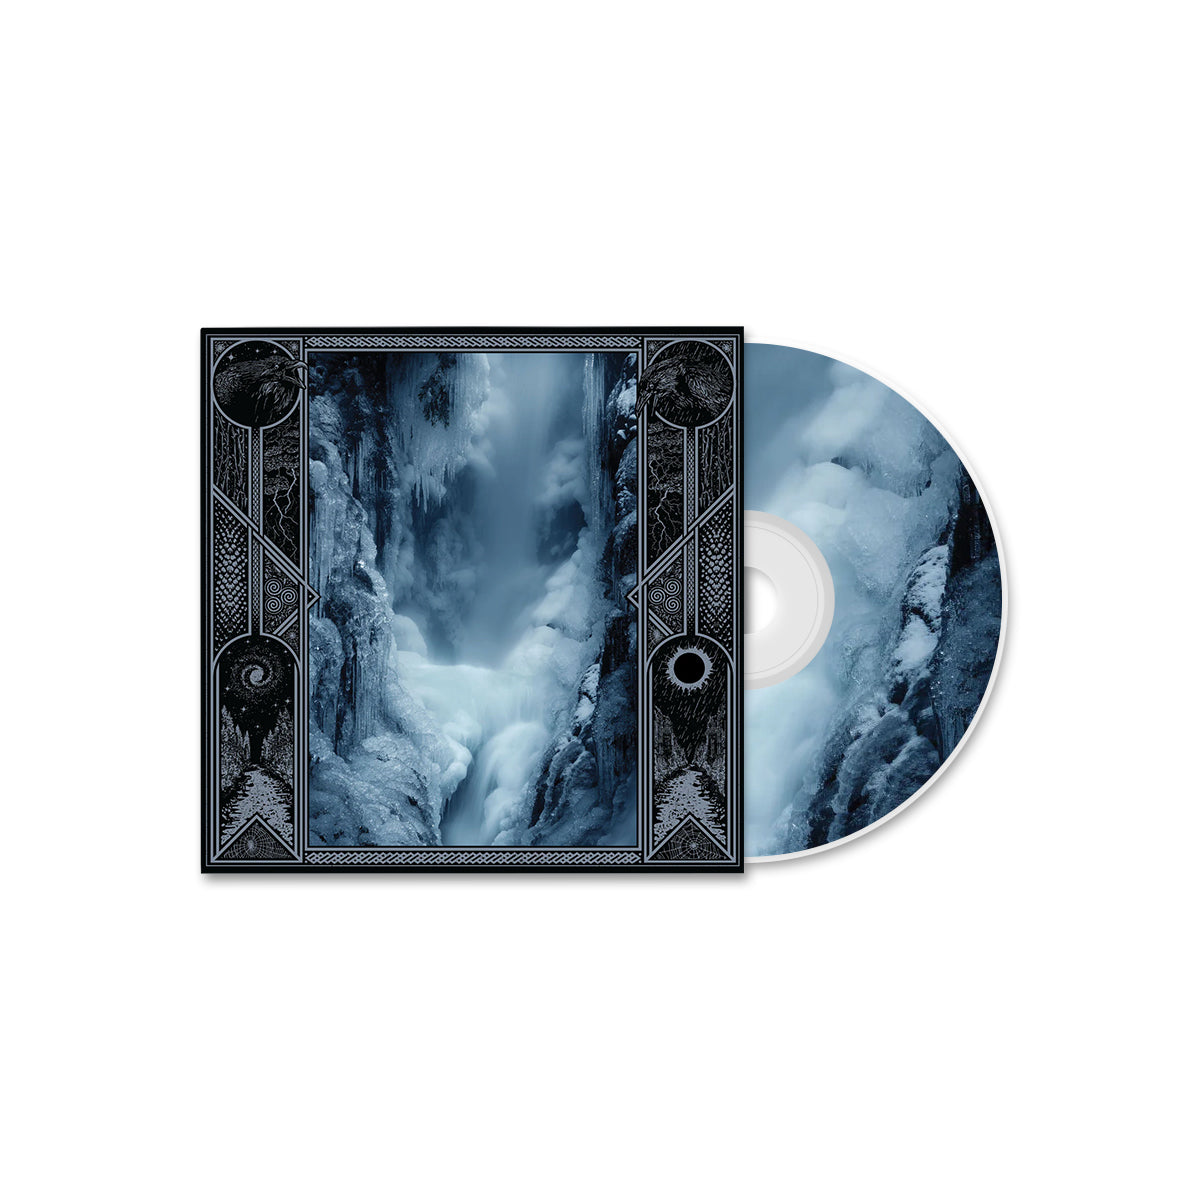 WOLVES IN THE THRONE ROOM "Crypt Of Ancestral Knowledge" CD